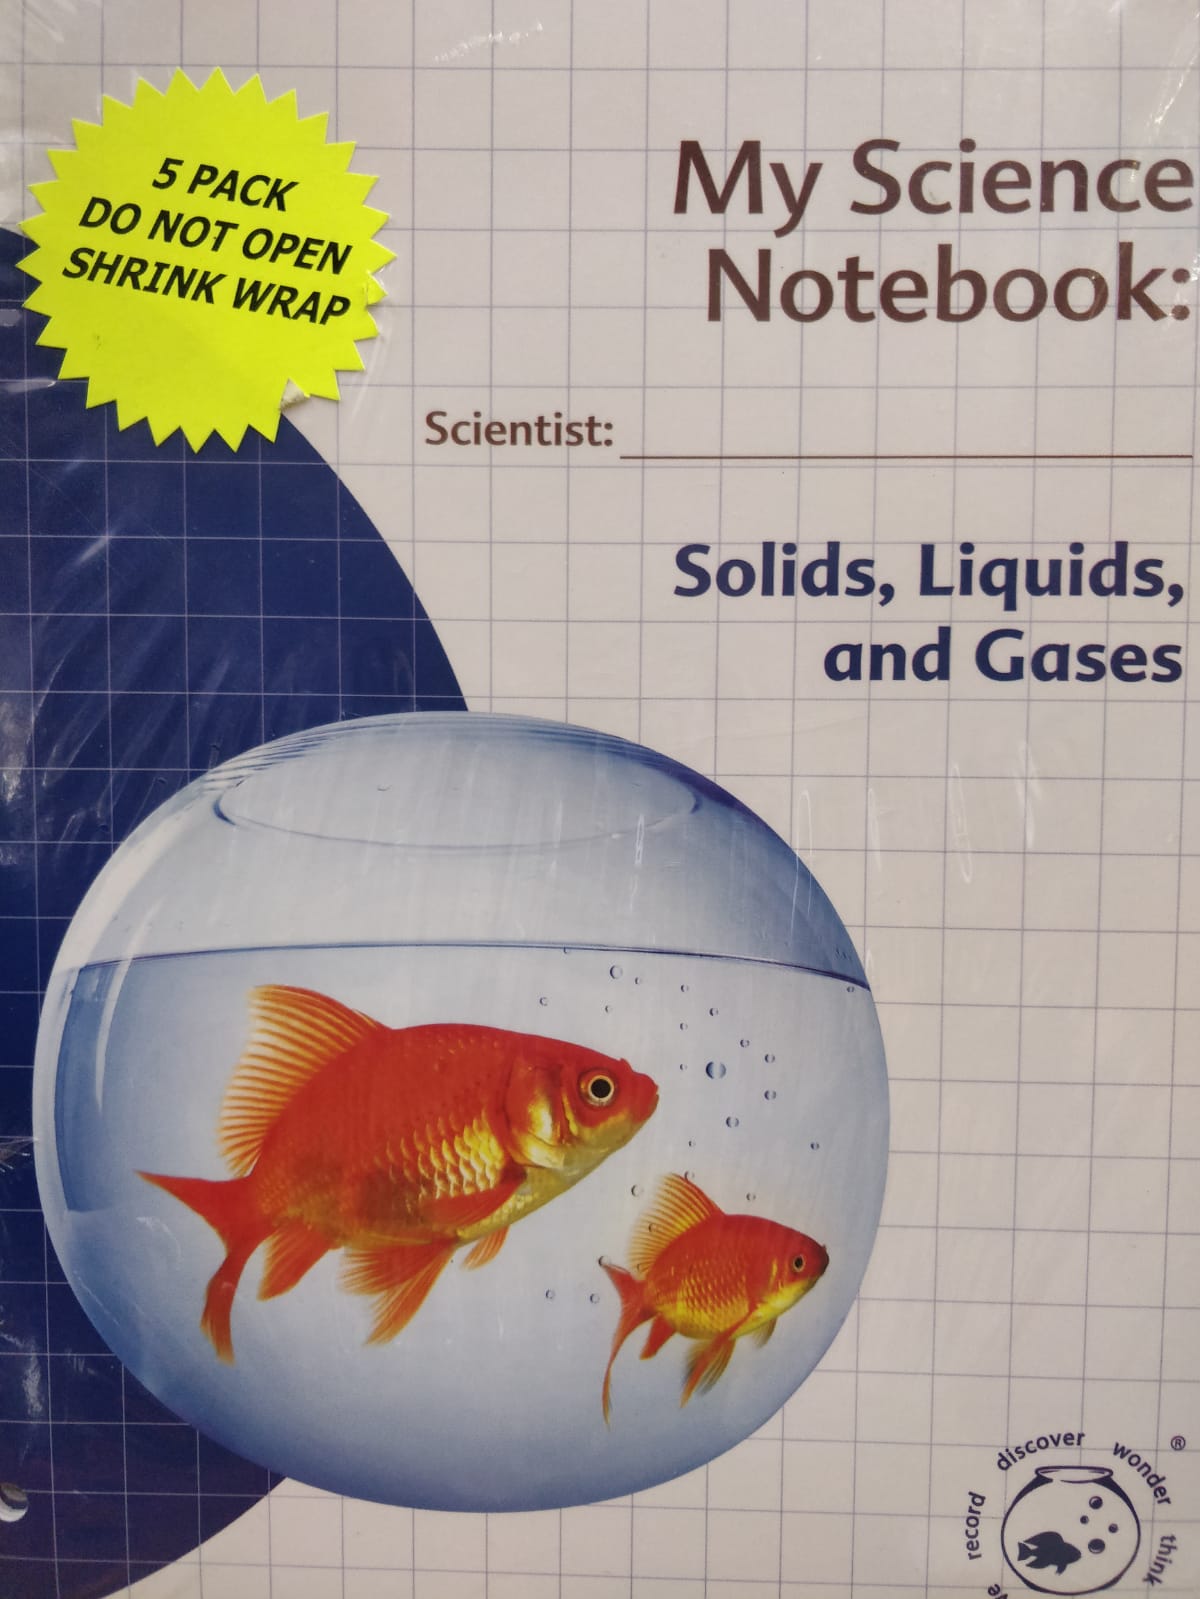 My Science Notebook Solids, Liquids and Gases